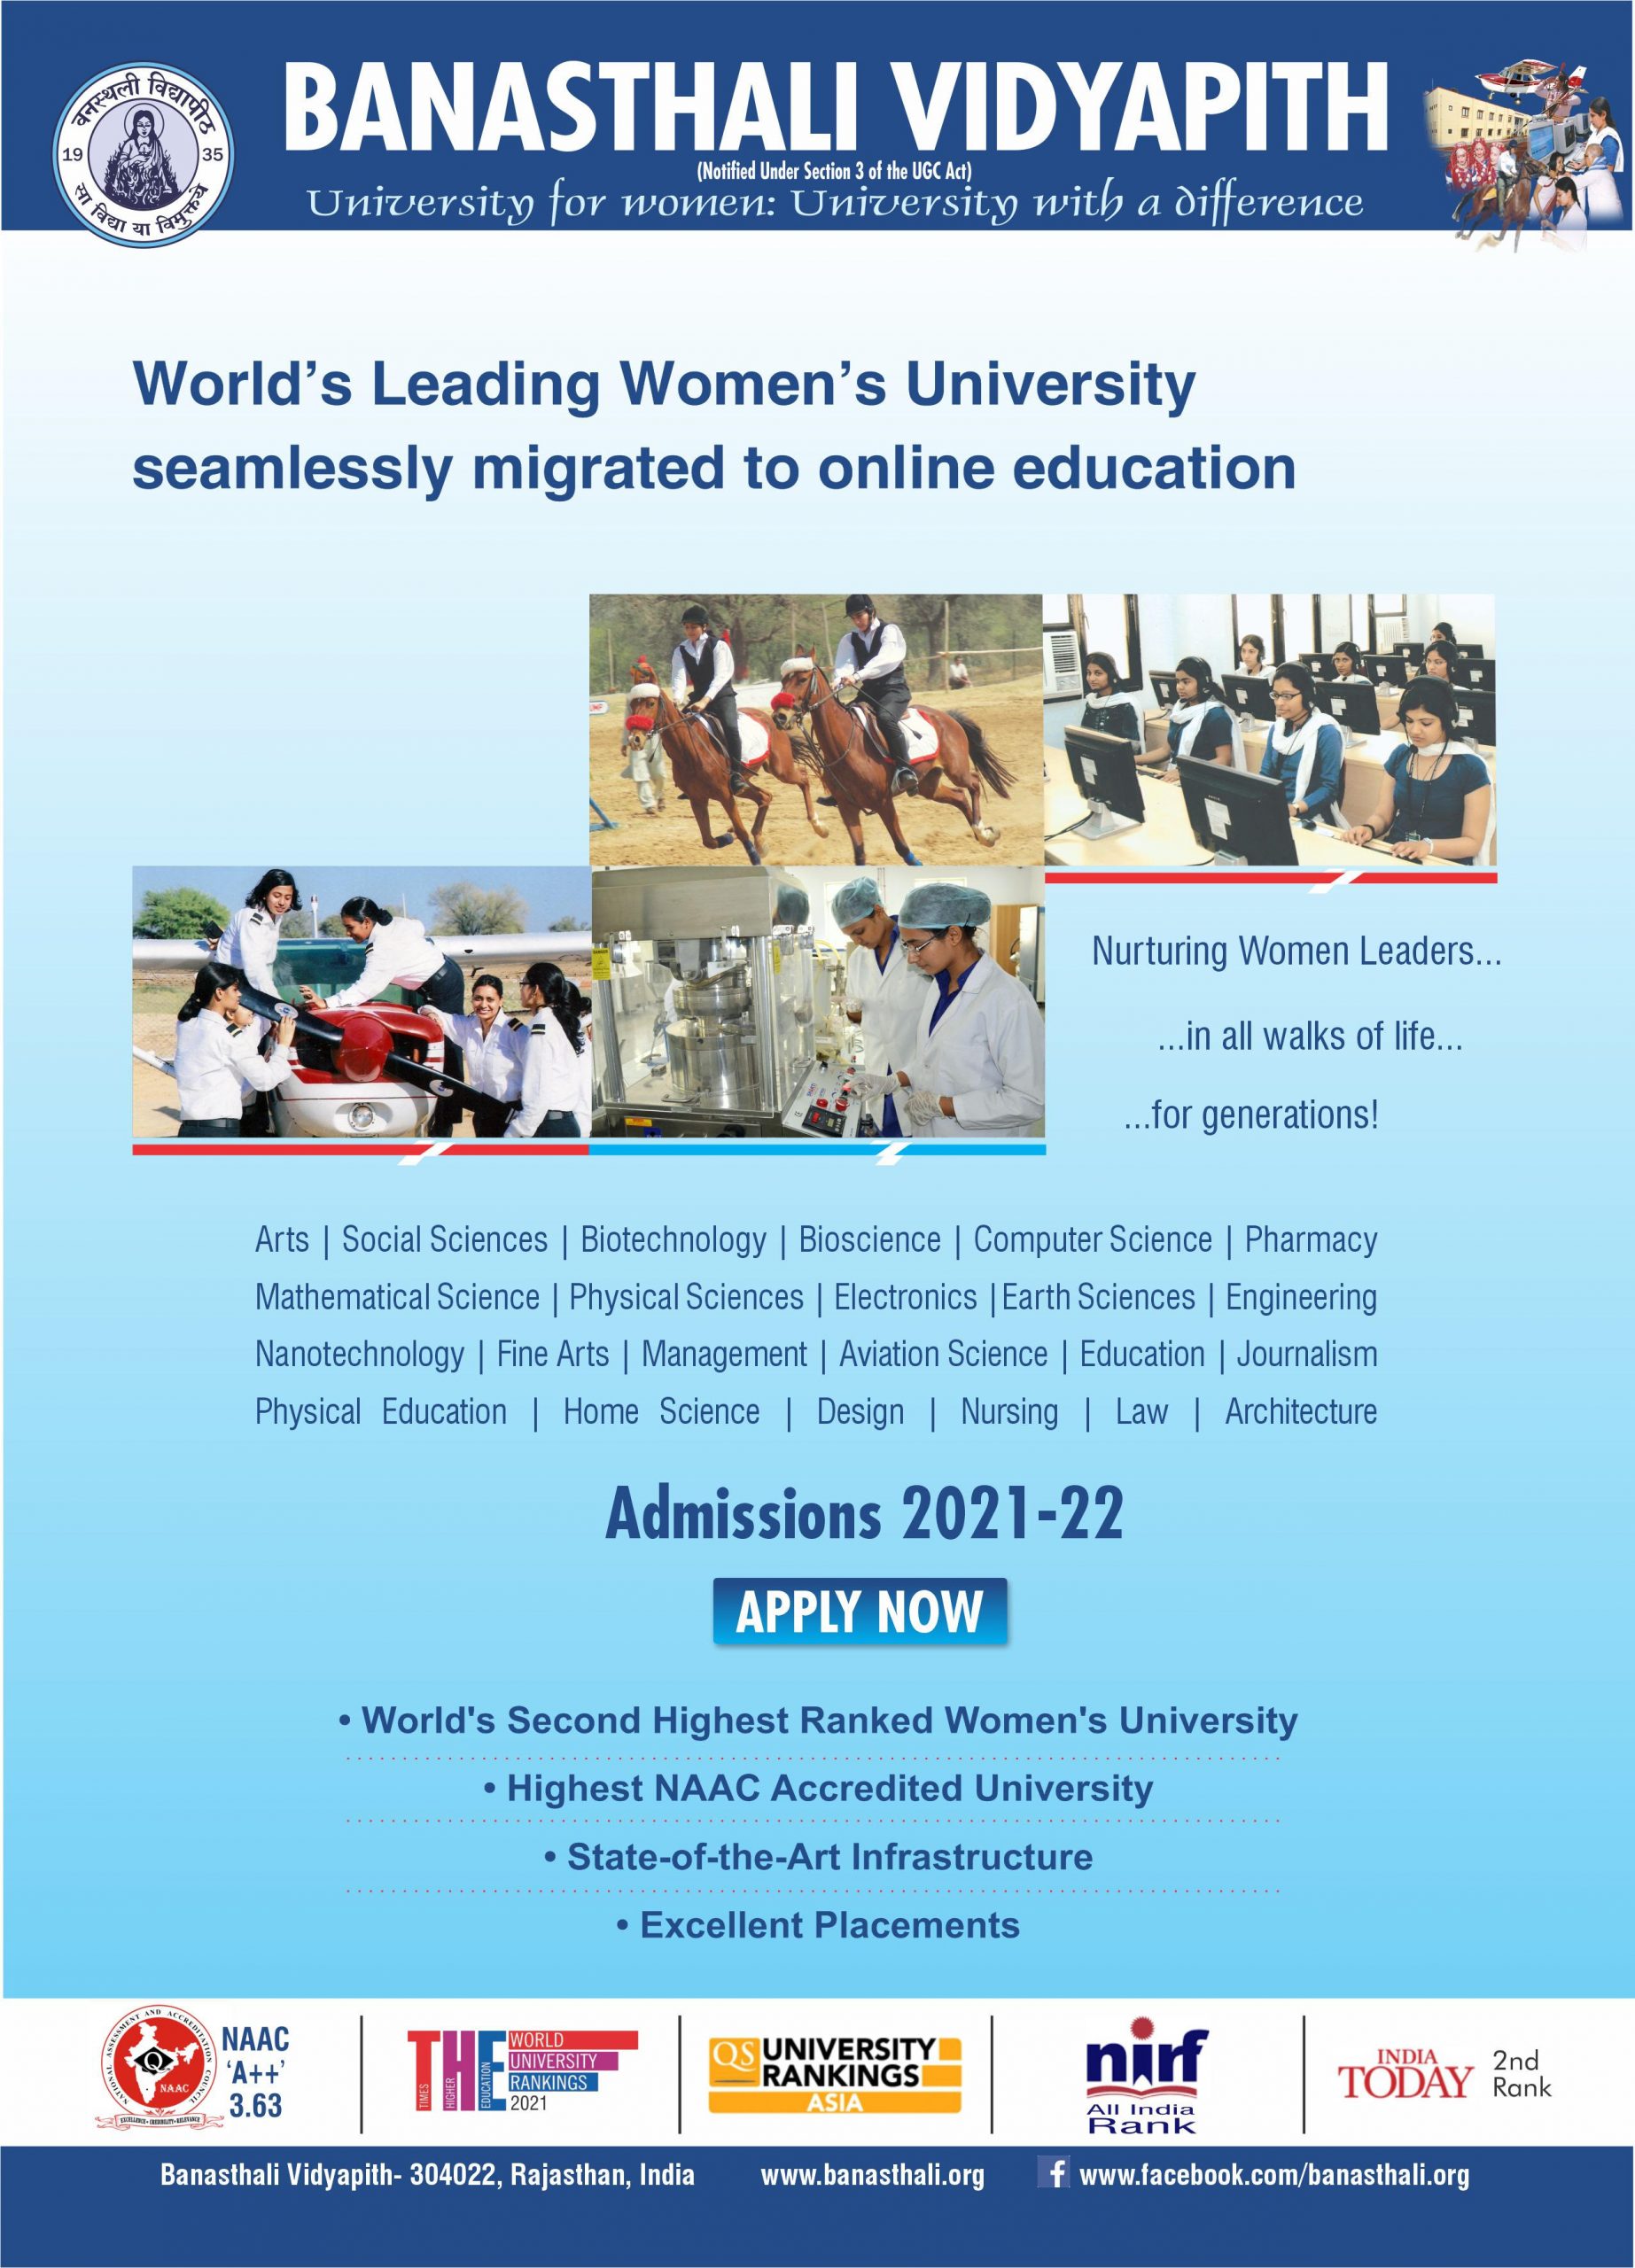 admissions-open-2021-22-banasthali-vidyapith-the-world-s-leading-women-s-university-for-all